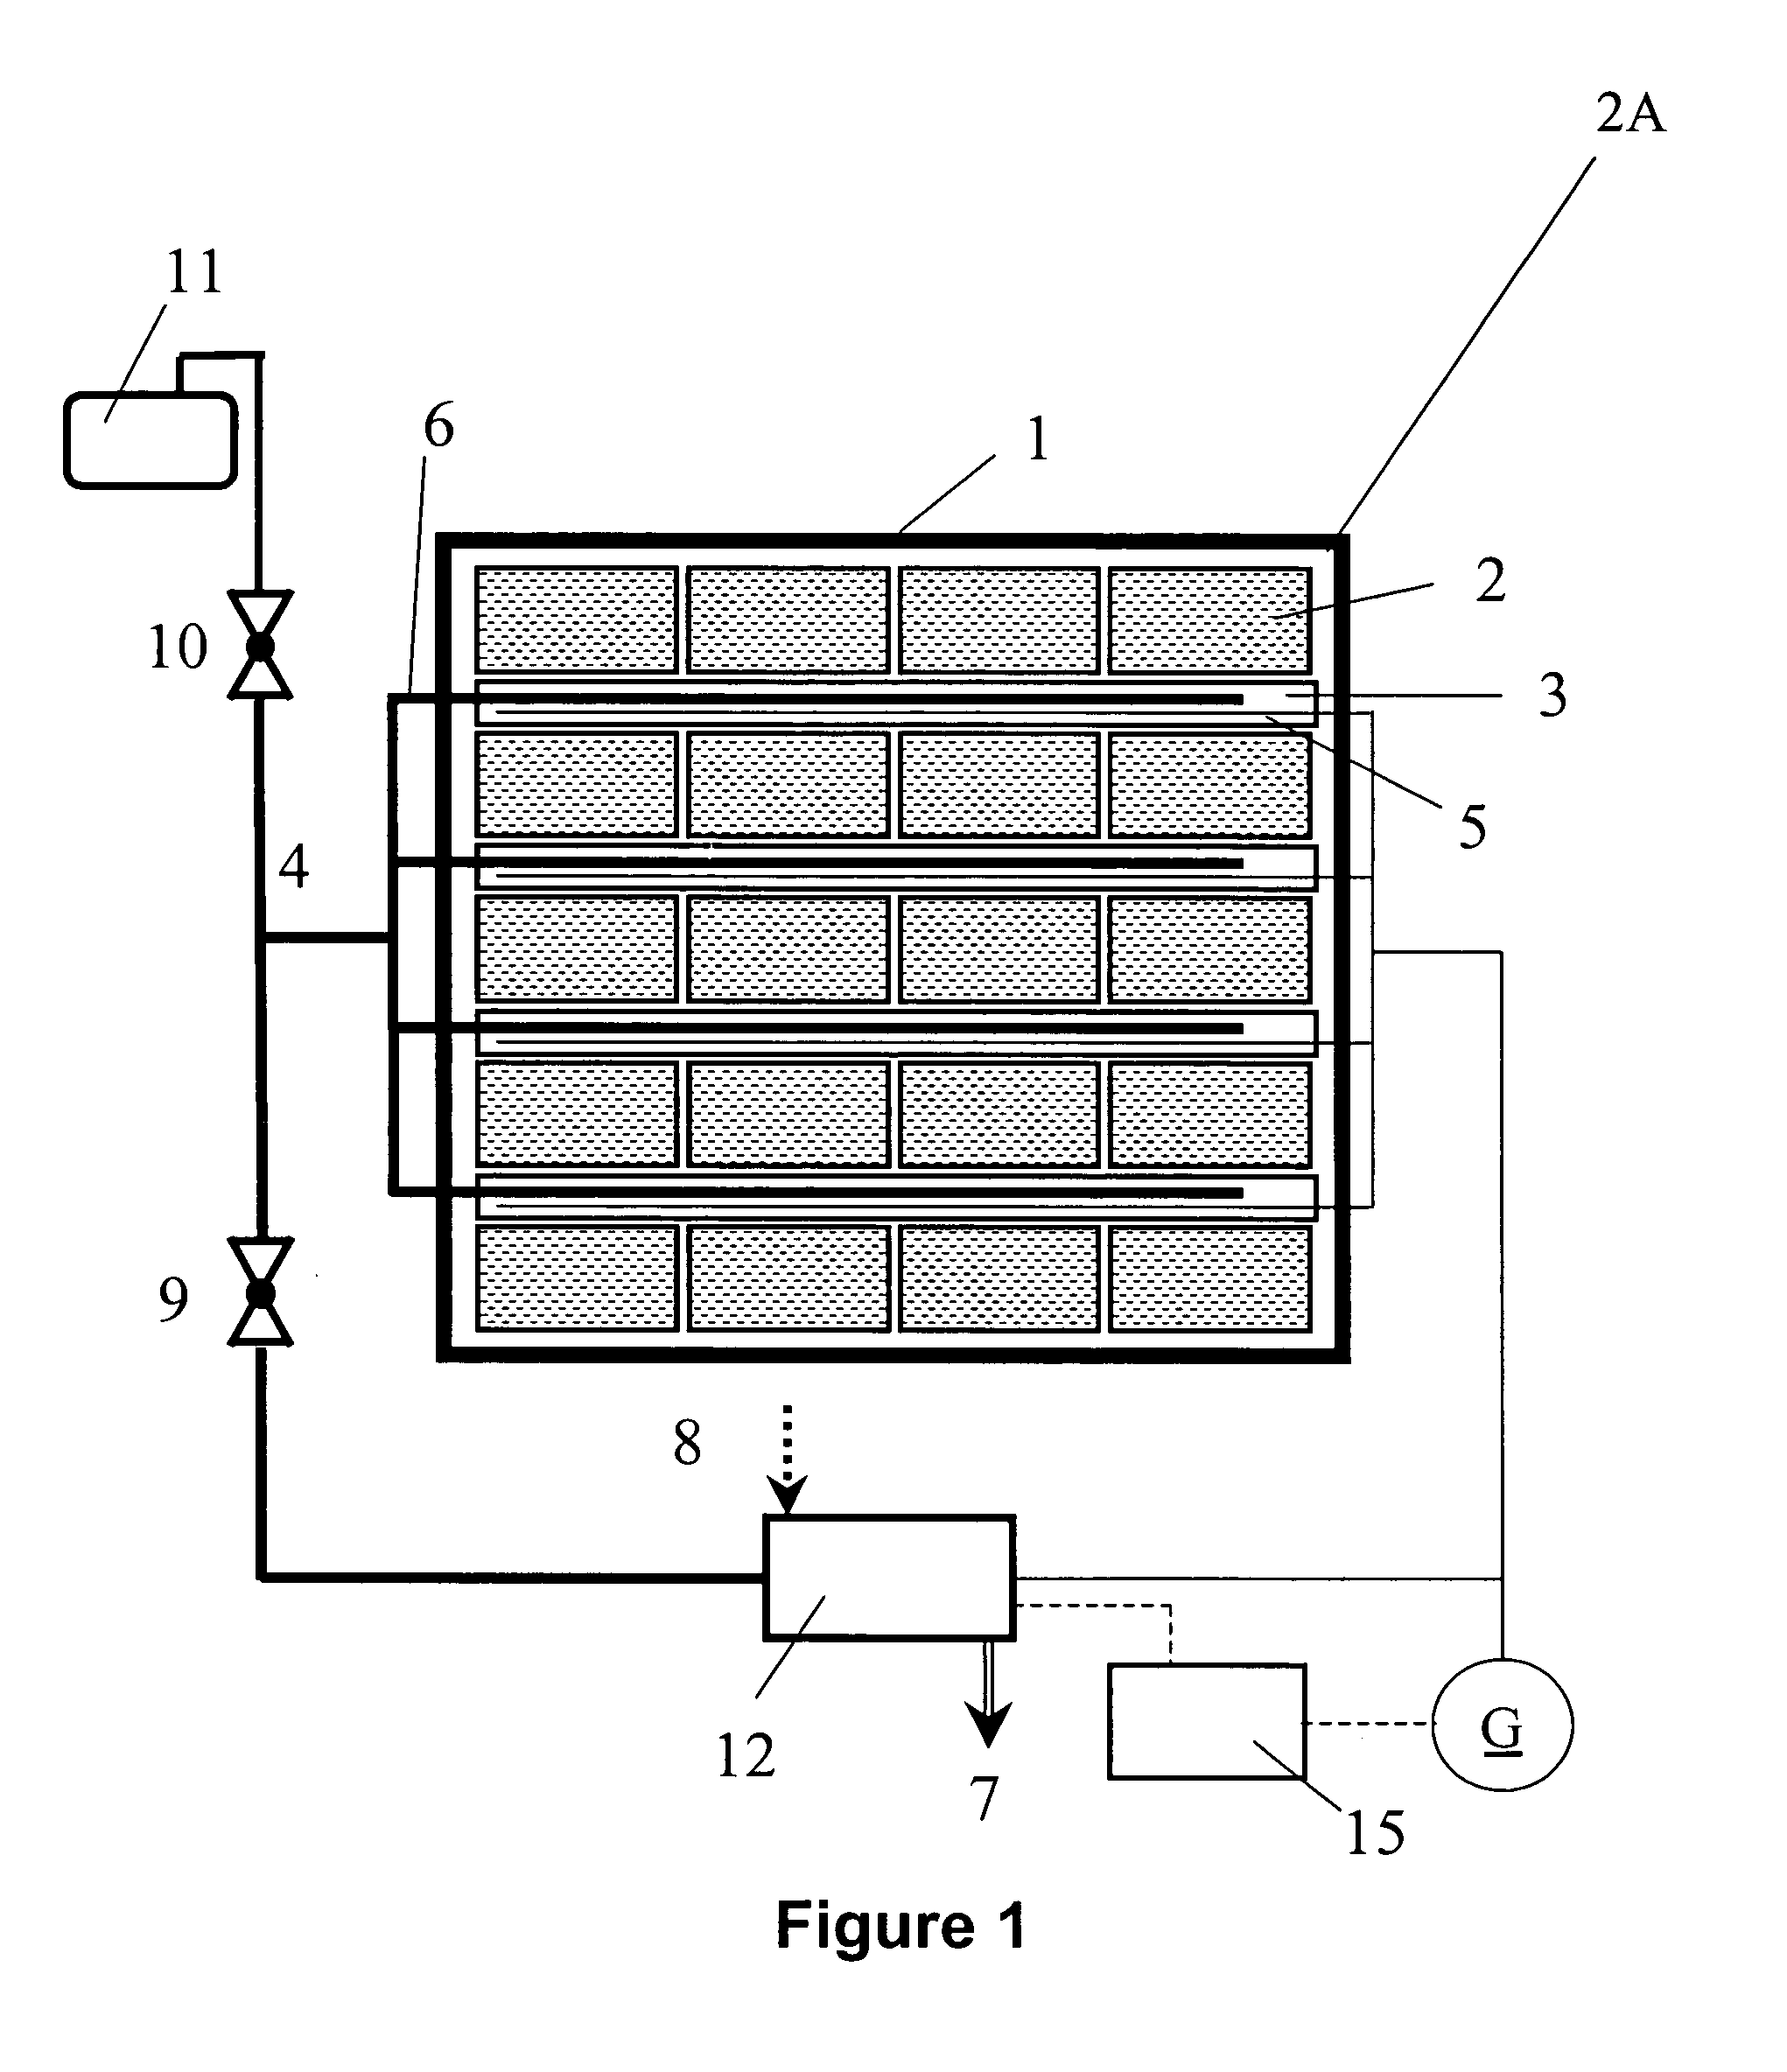 Heating system for use in on-board kitchens in means of transport and a method for heating food on board means of transport, in particular aircraft